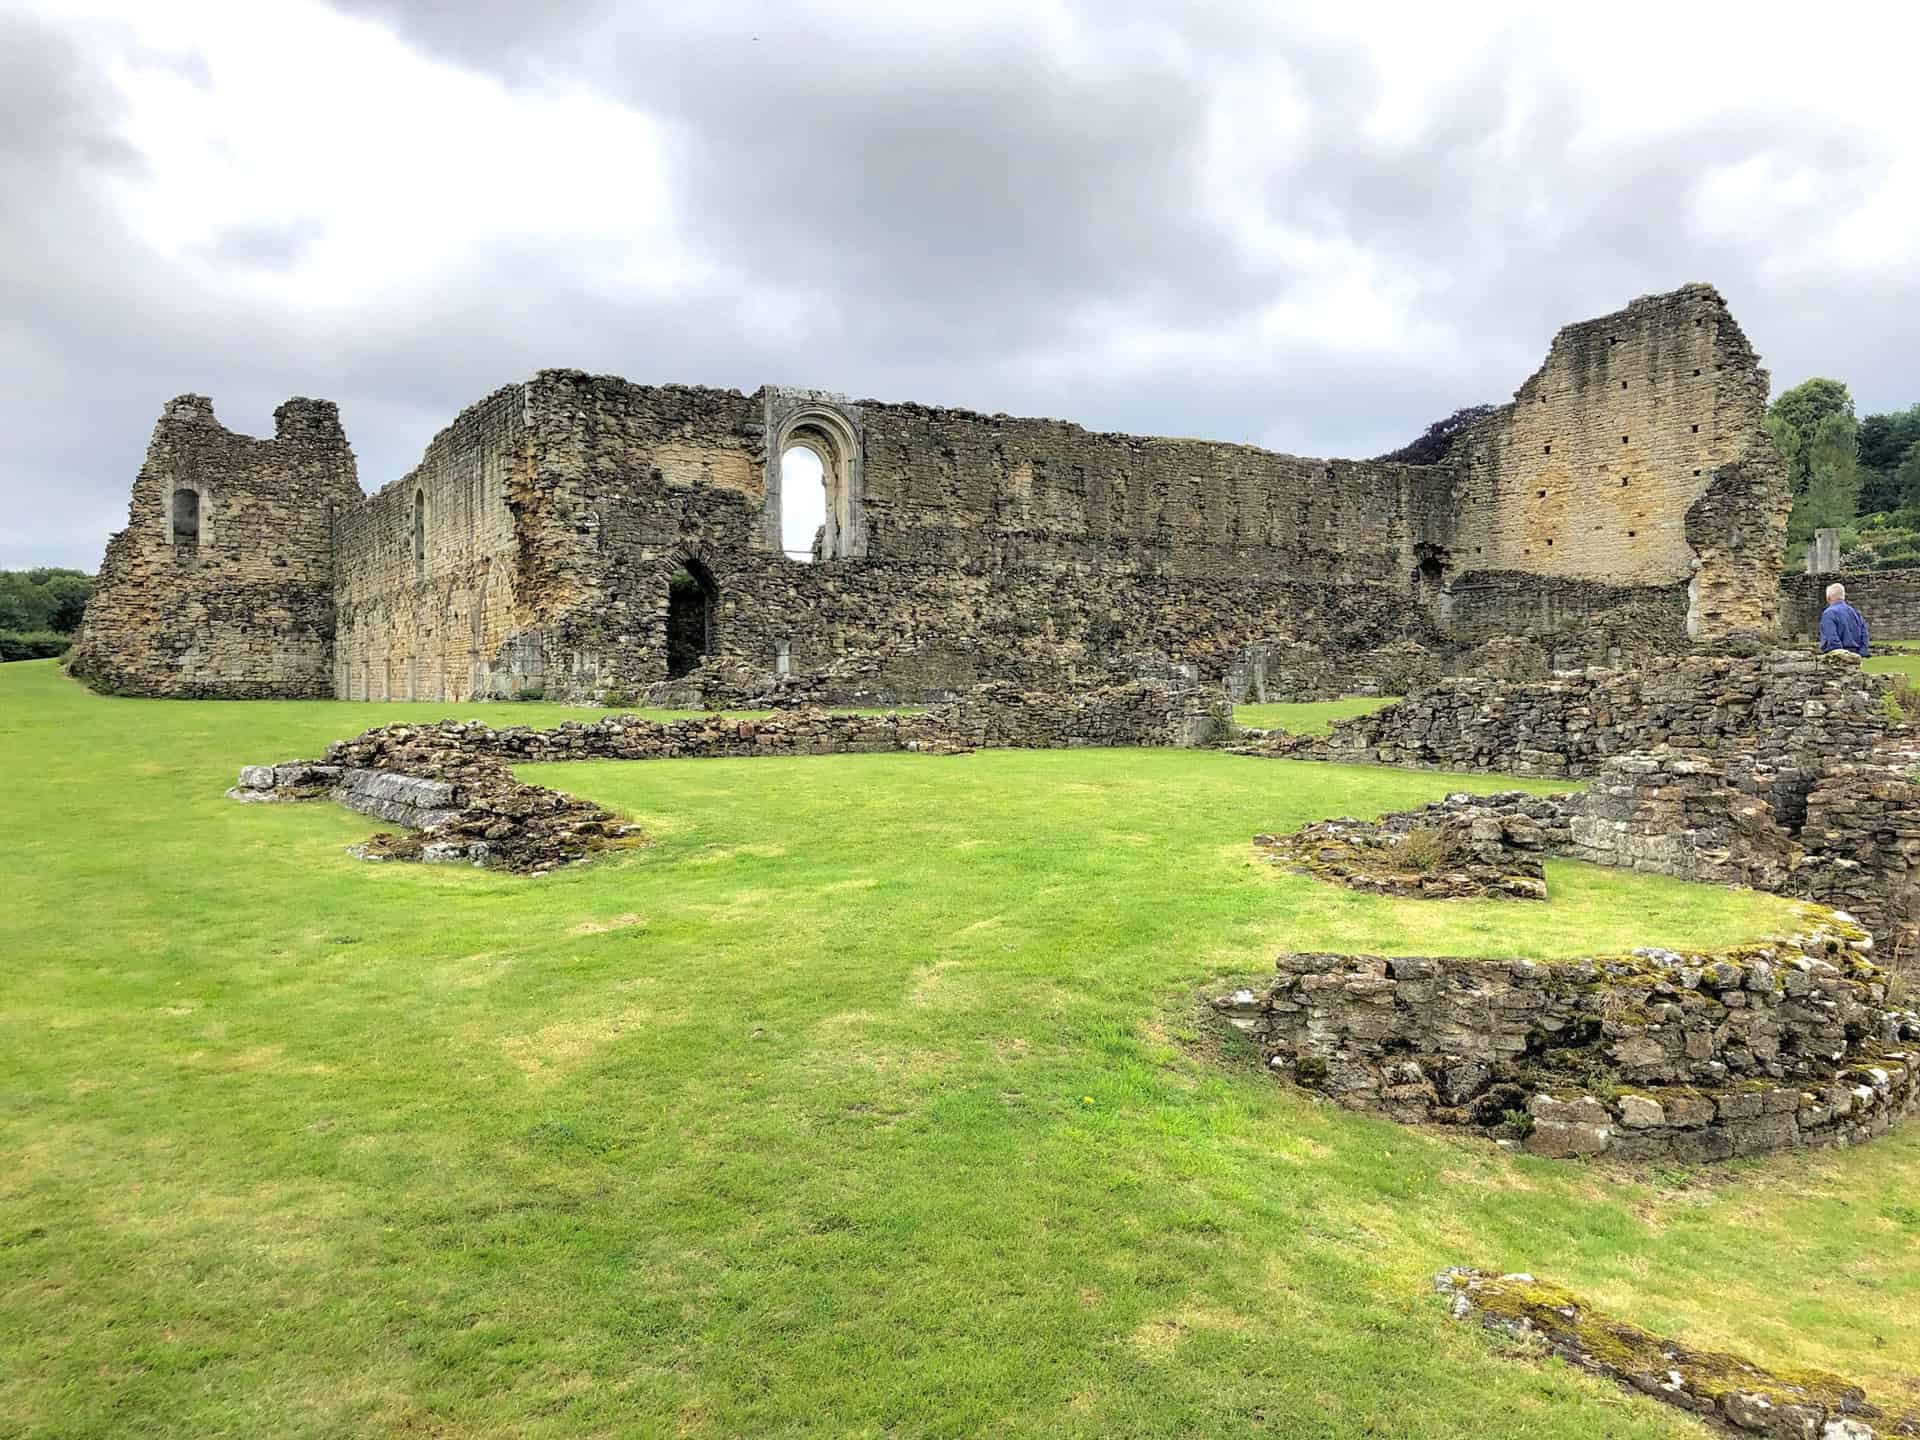 The priory was founded in 1122 by Walter l'Espec, Lord of Helmsley, for canons of St Augustine. Though they lived a communal life the Augustinian canons were not regarded as monks and were all ordained as priests.